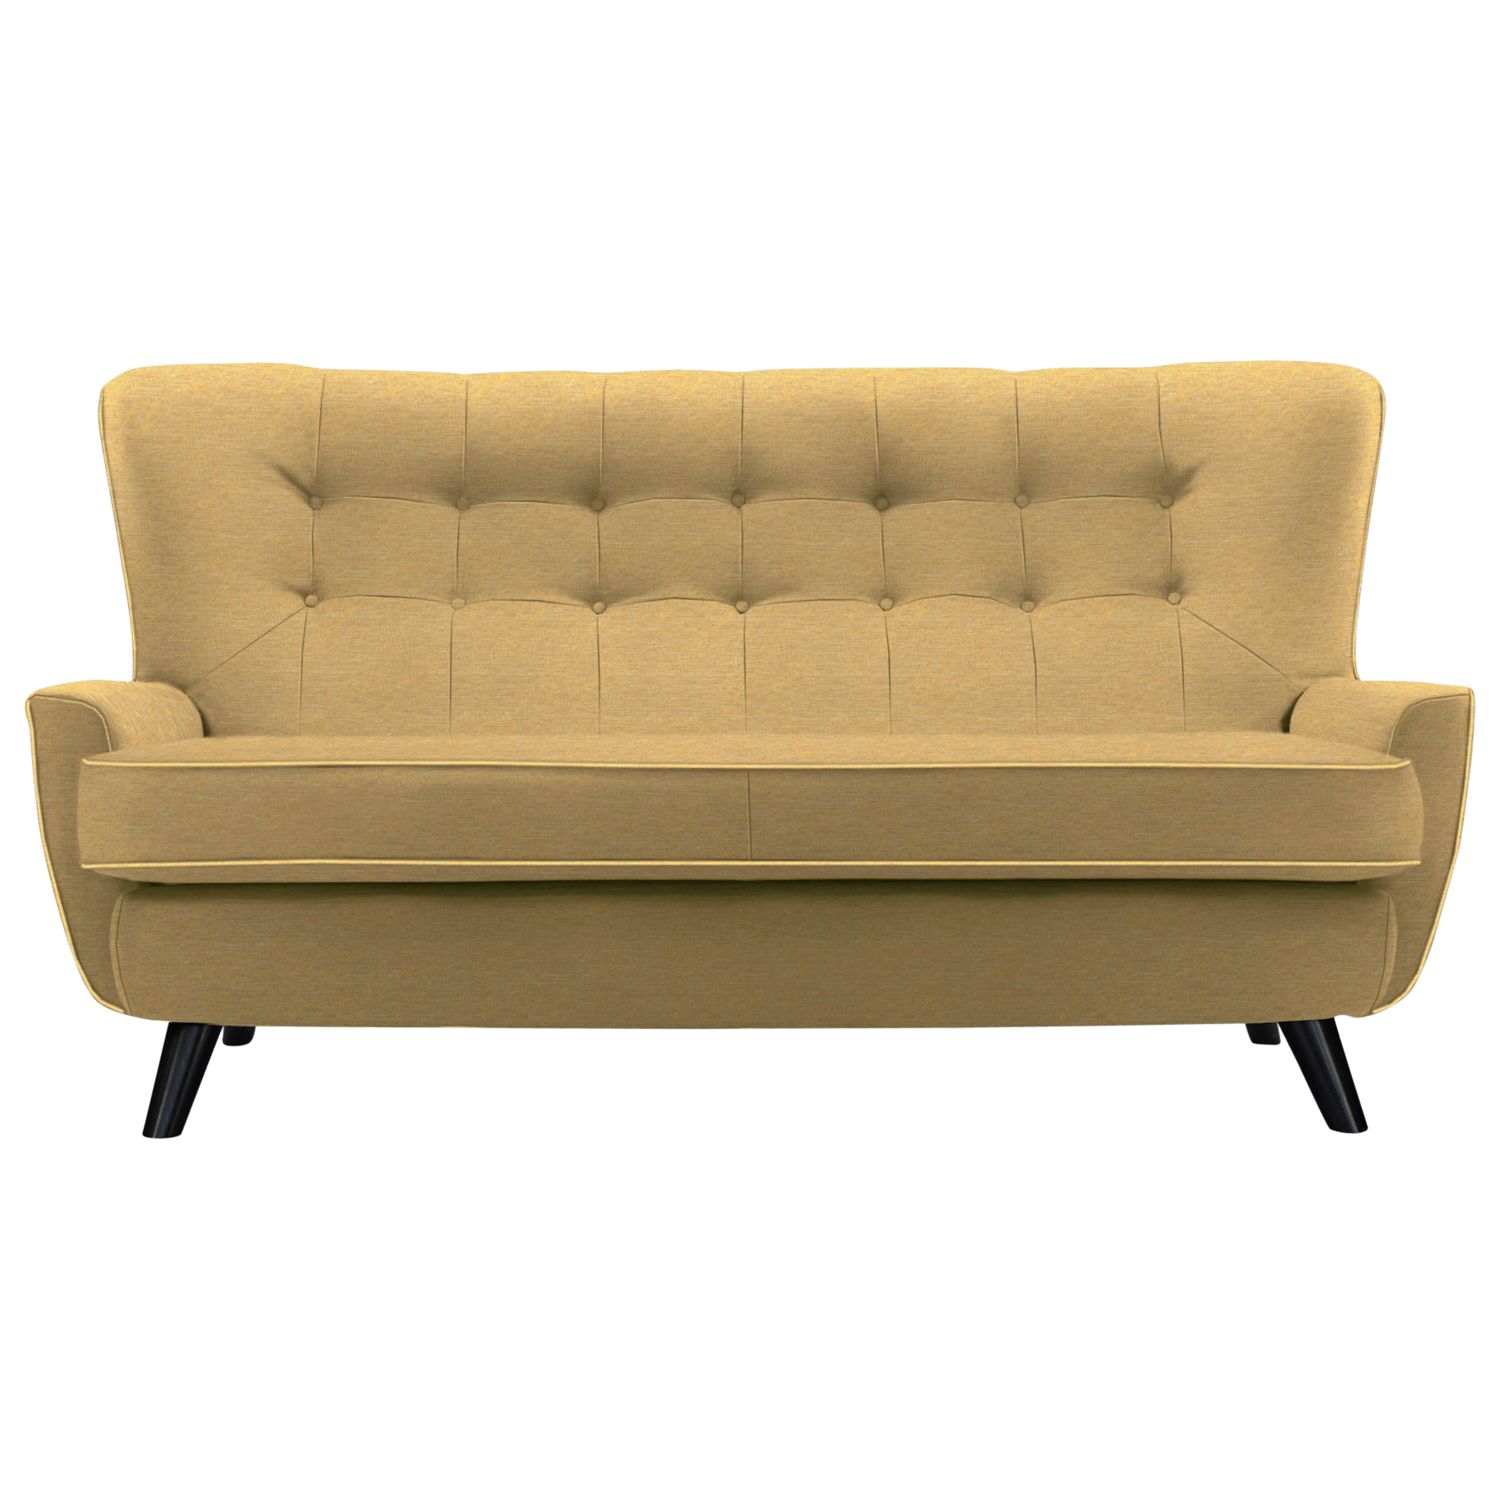 G Plan Vintage The Sixty One Large Sofa, Tonic Mustard, width 185cm